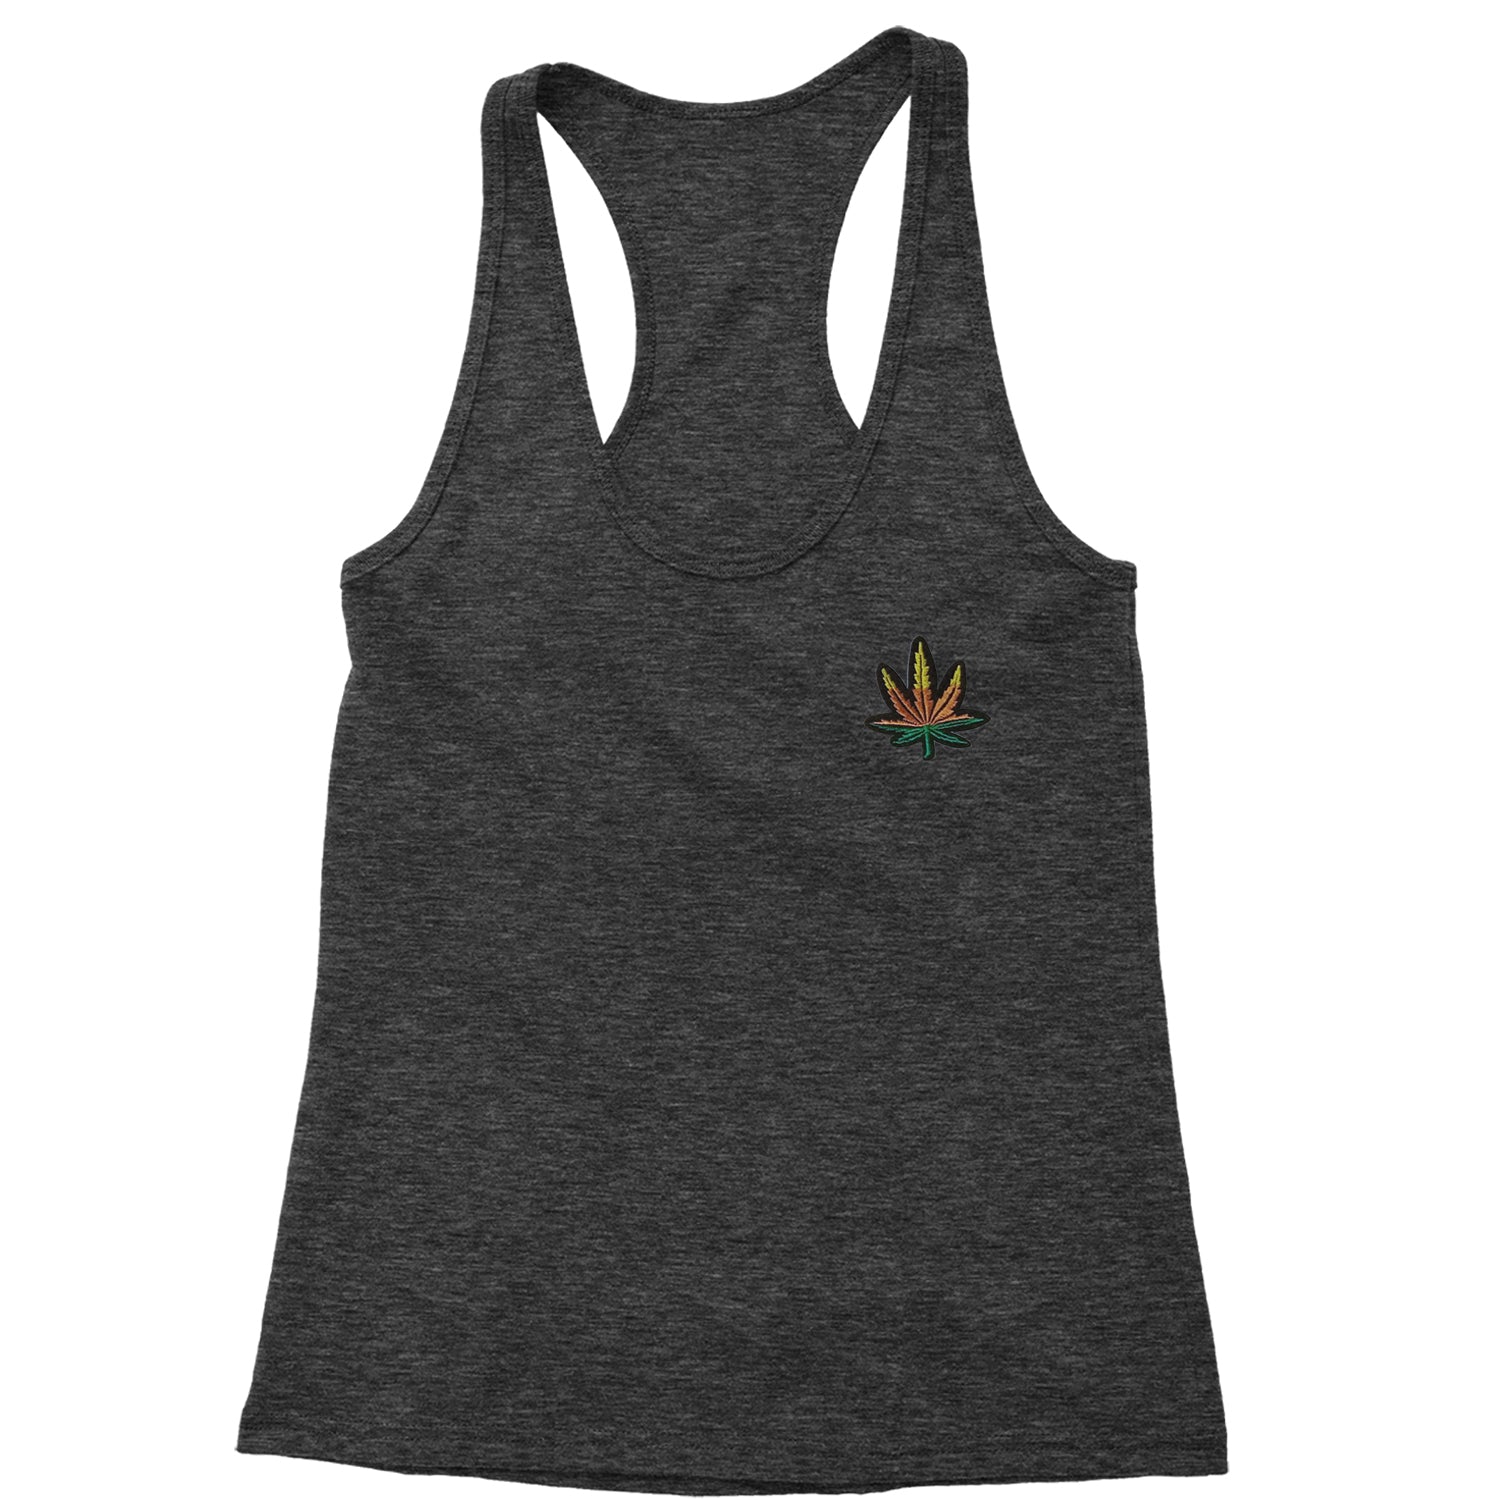 Embroidered Rasta Pot Leaf Patch (Pocket Print) Racerback Tank Top for Women bob, legalize, marijuana, marley, rastafarian, weed by Expression Tees